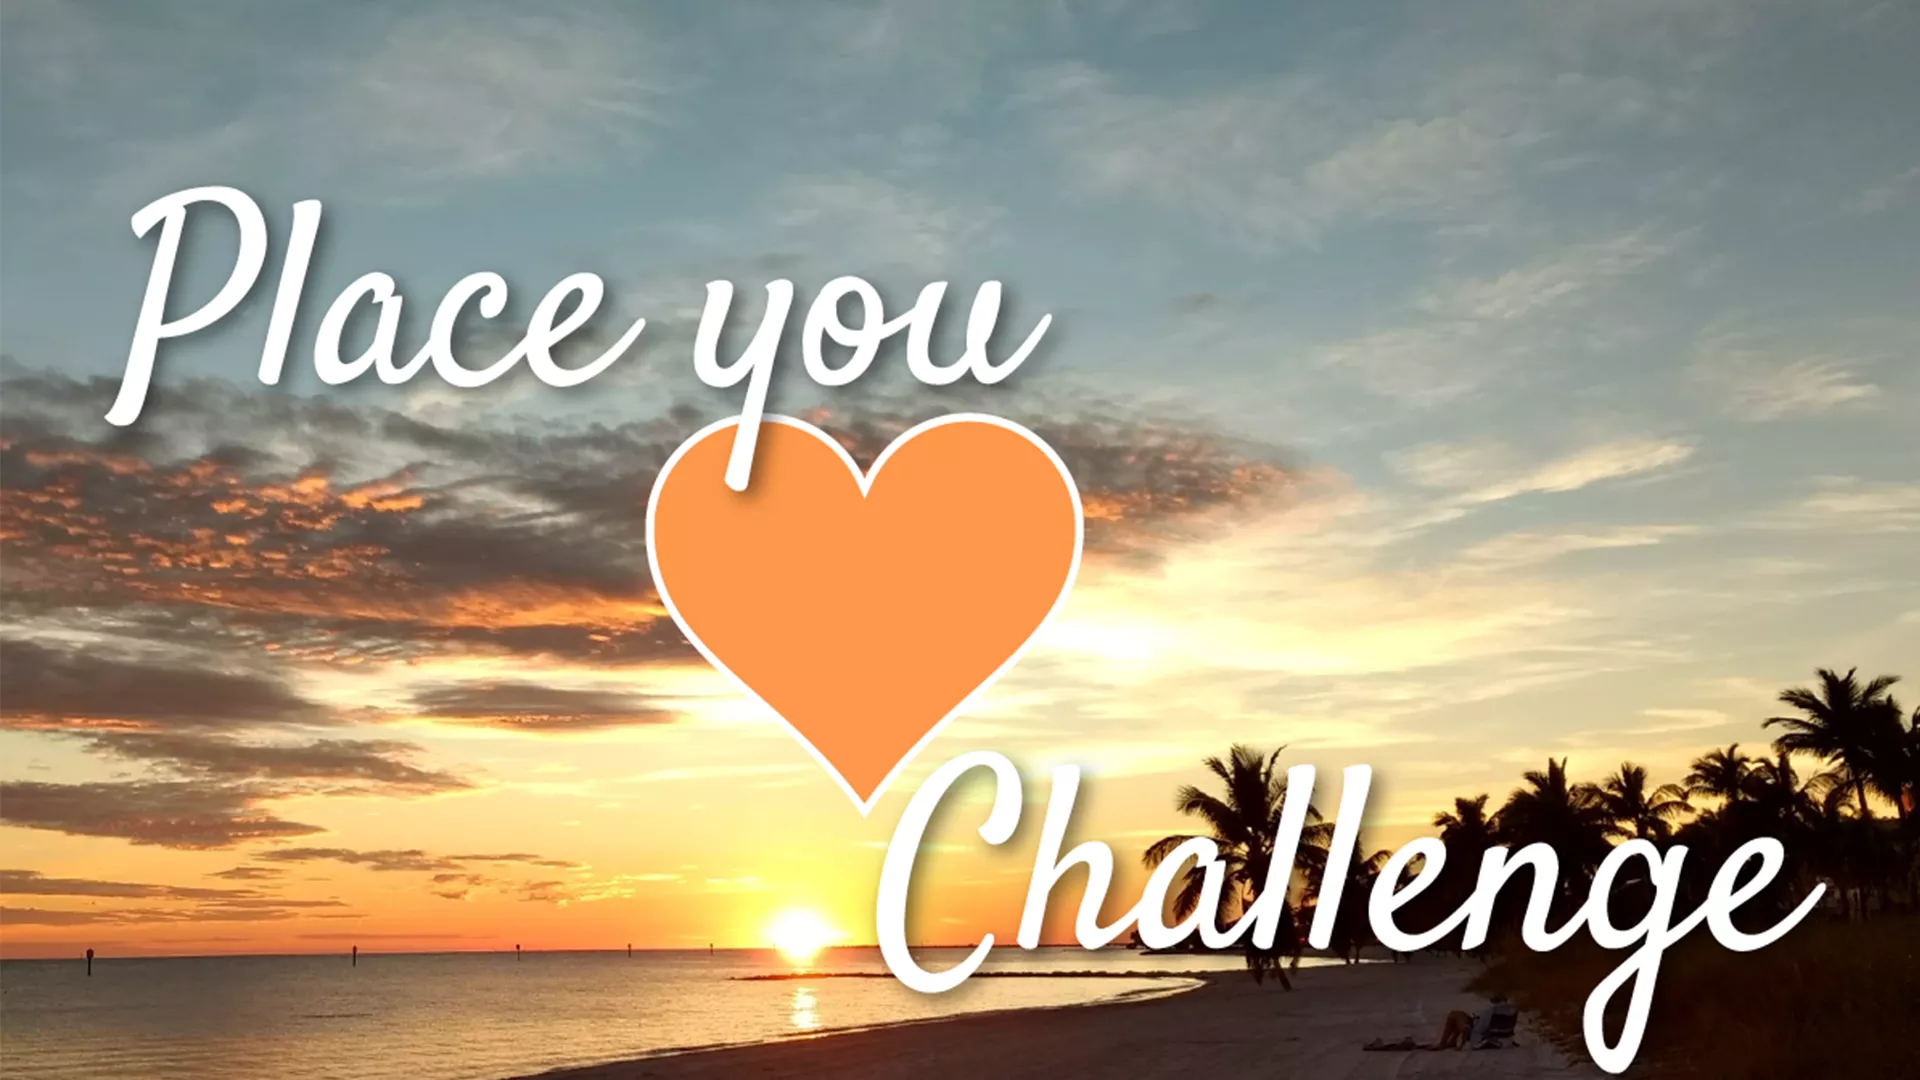 Image of a heart and a sunset; place you love challenge